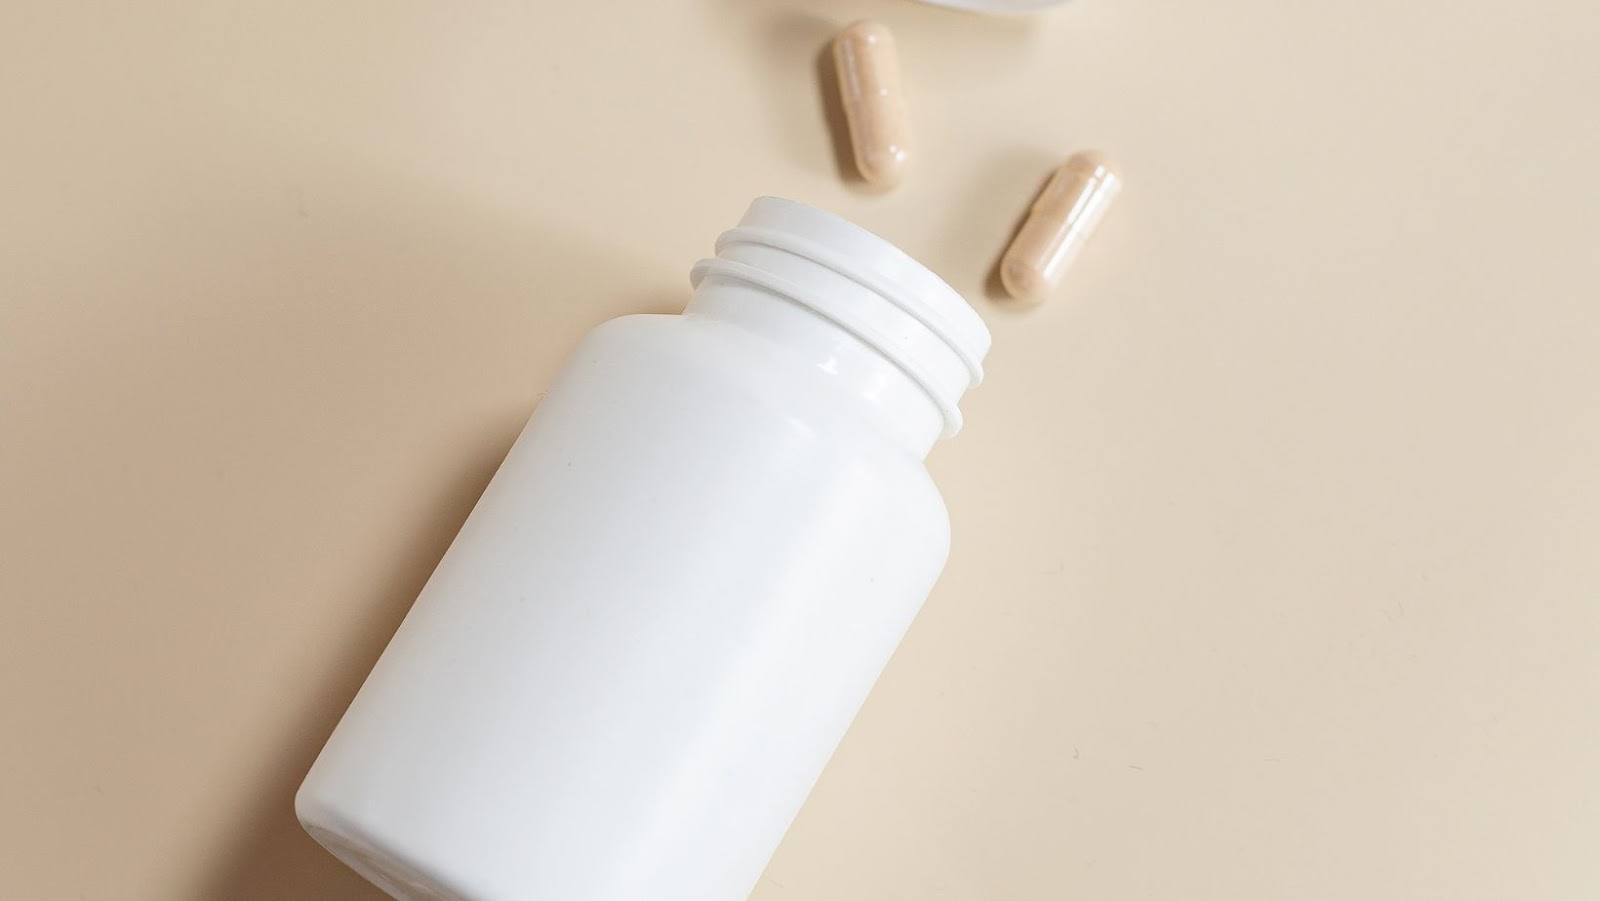 Who is Most Likely to Benefit From Taking Vitamin B12 Supplements?